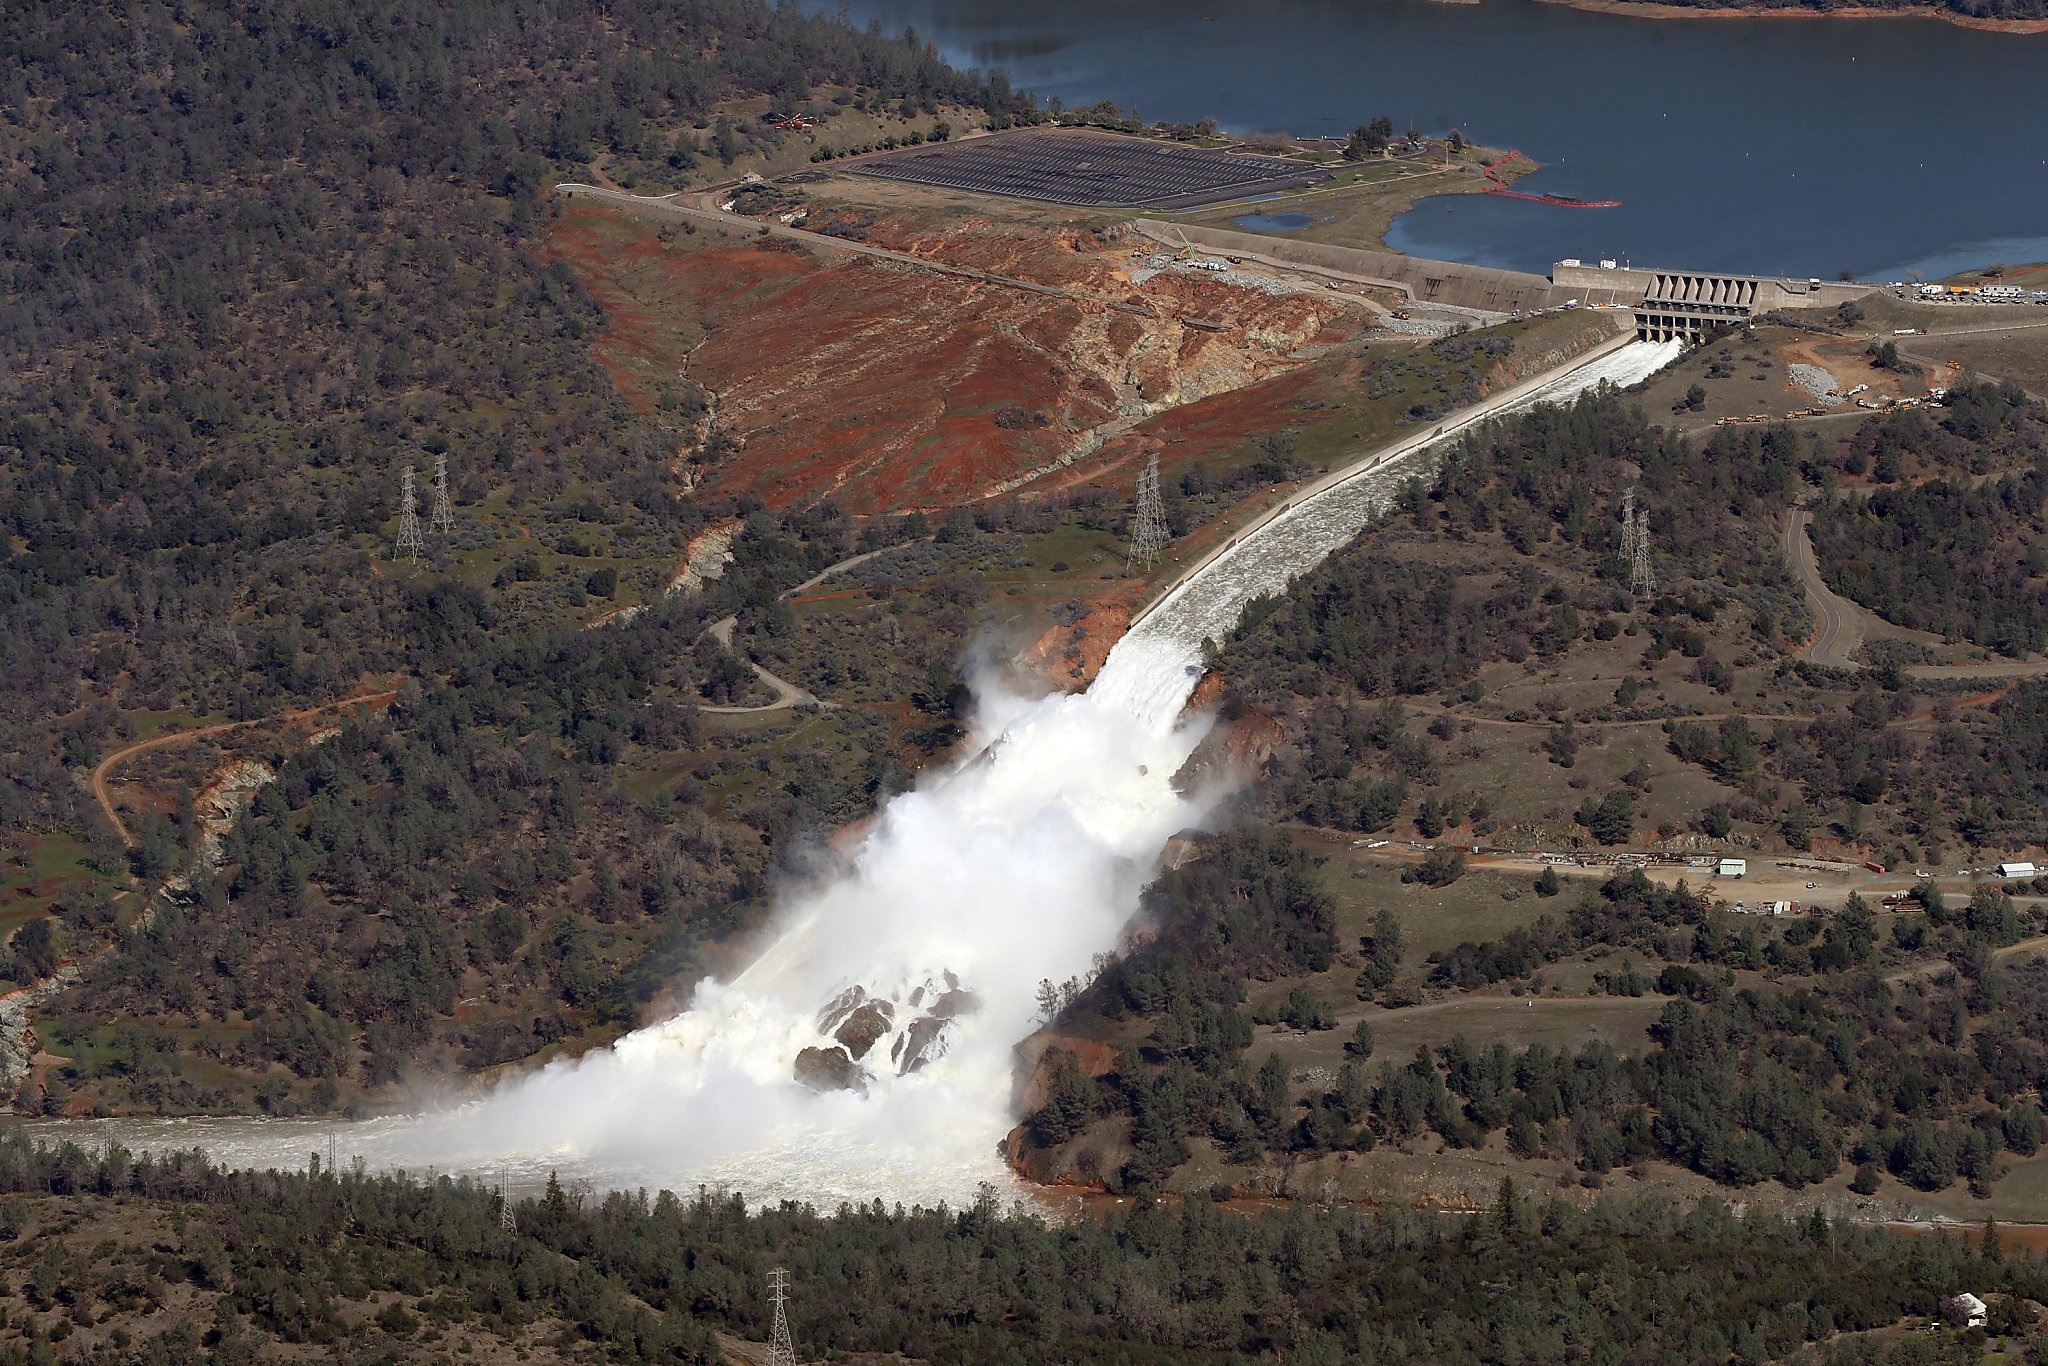 Even after Oroville near-disaster, California dams remain potentially hazar...